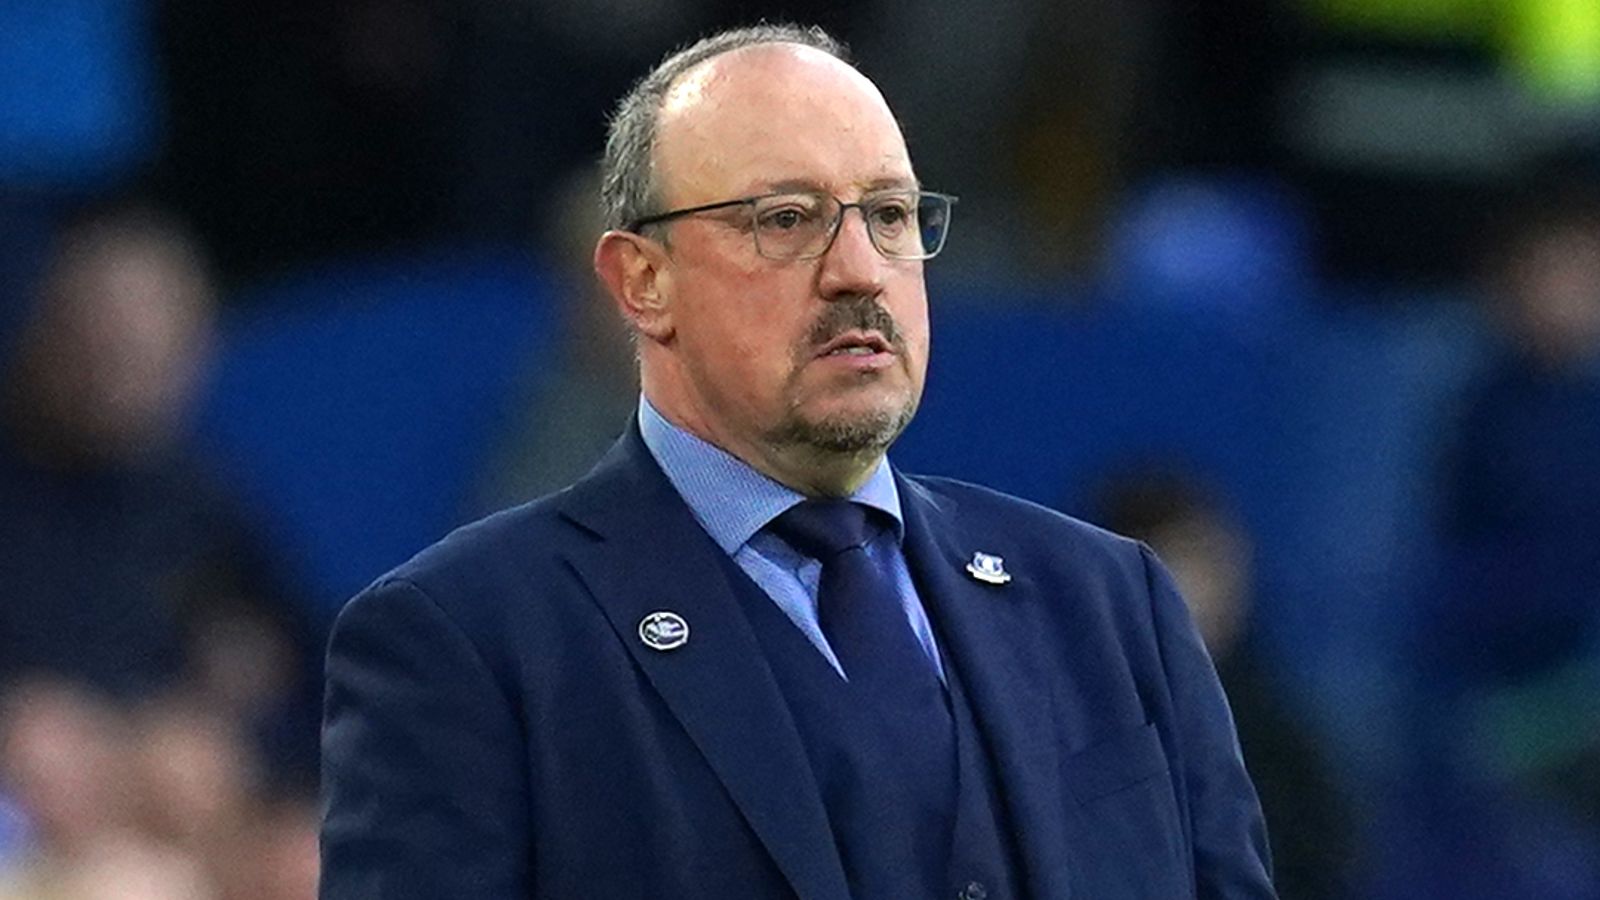 Rafael Benitez: Everton boss says he cannot fix club's problems in five months as he bids to turn form around